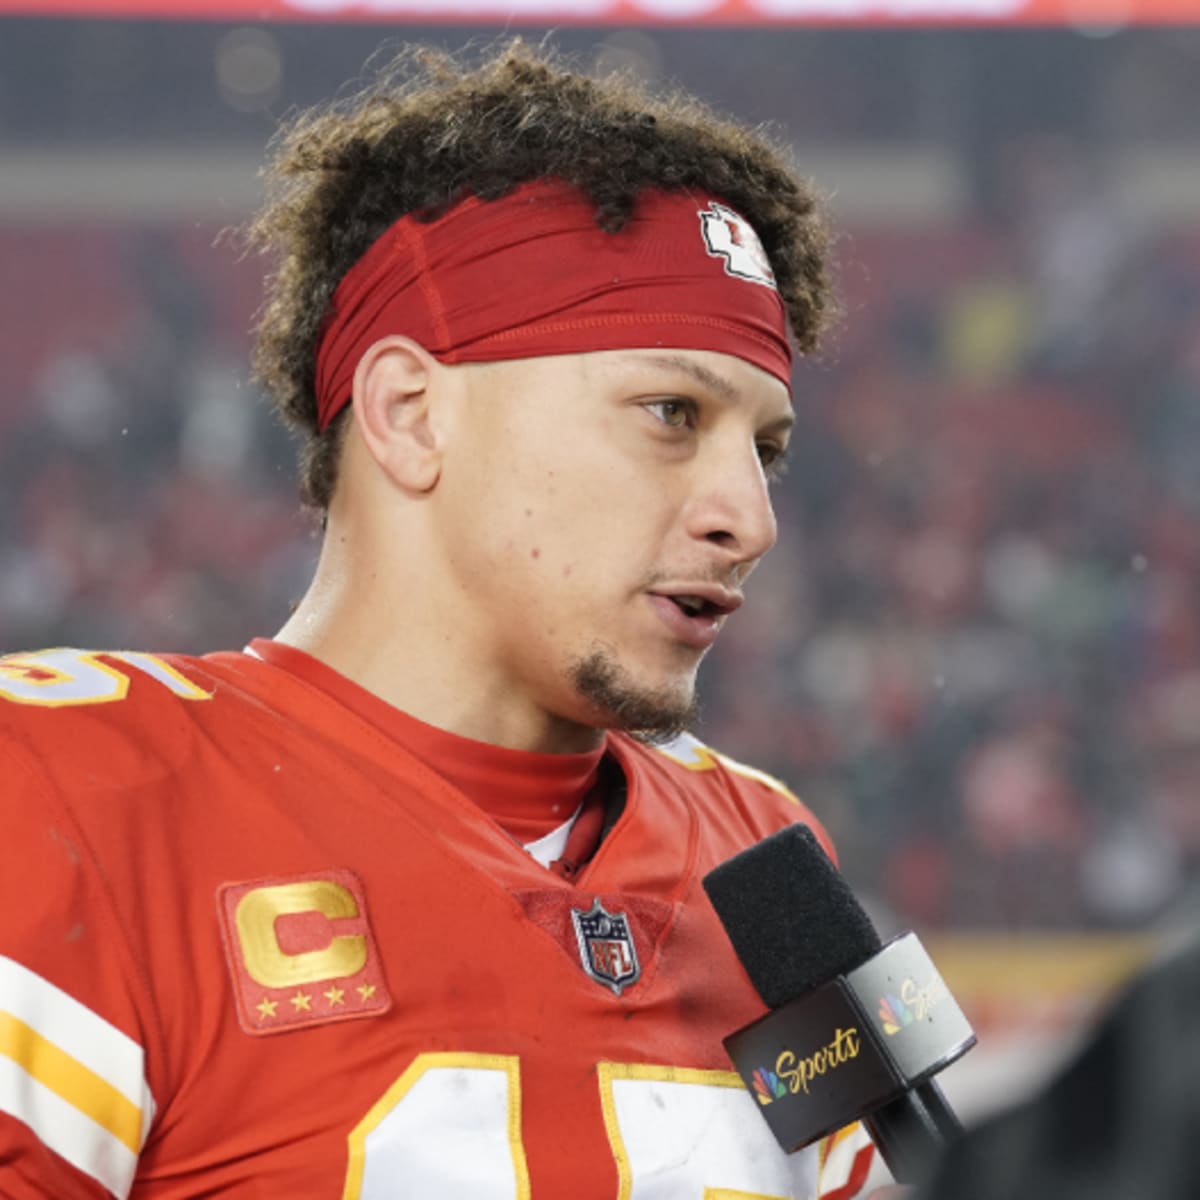 Chiefs' Mahomes becomes part-owner of MLB's Royals